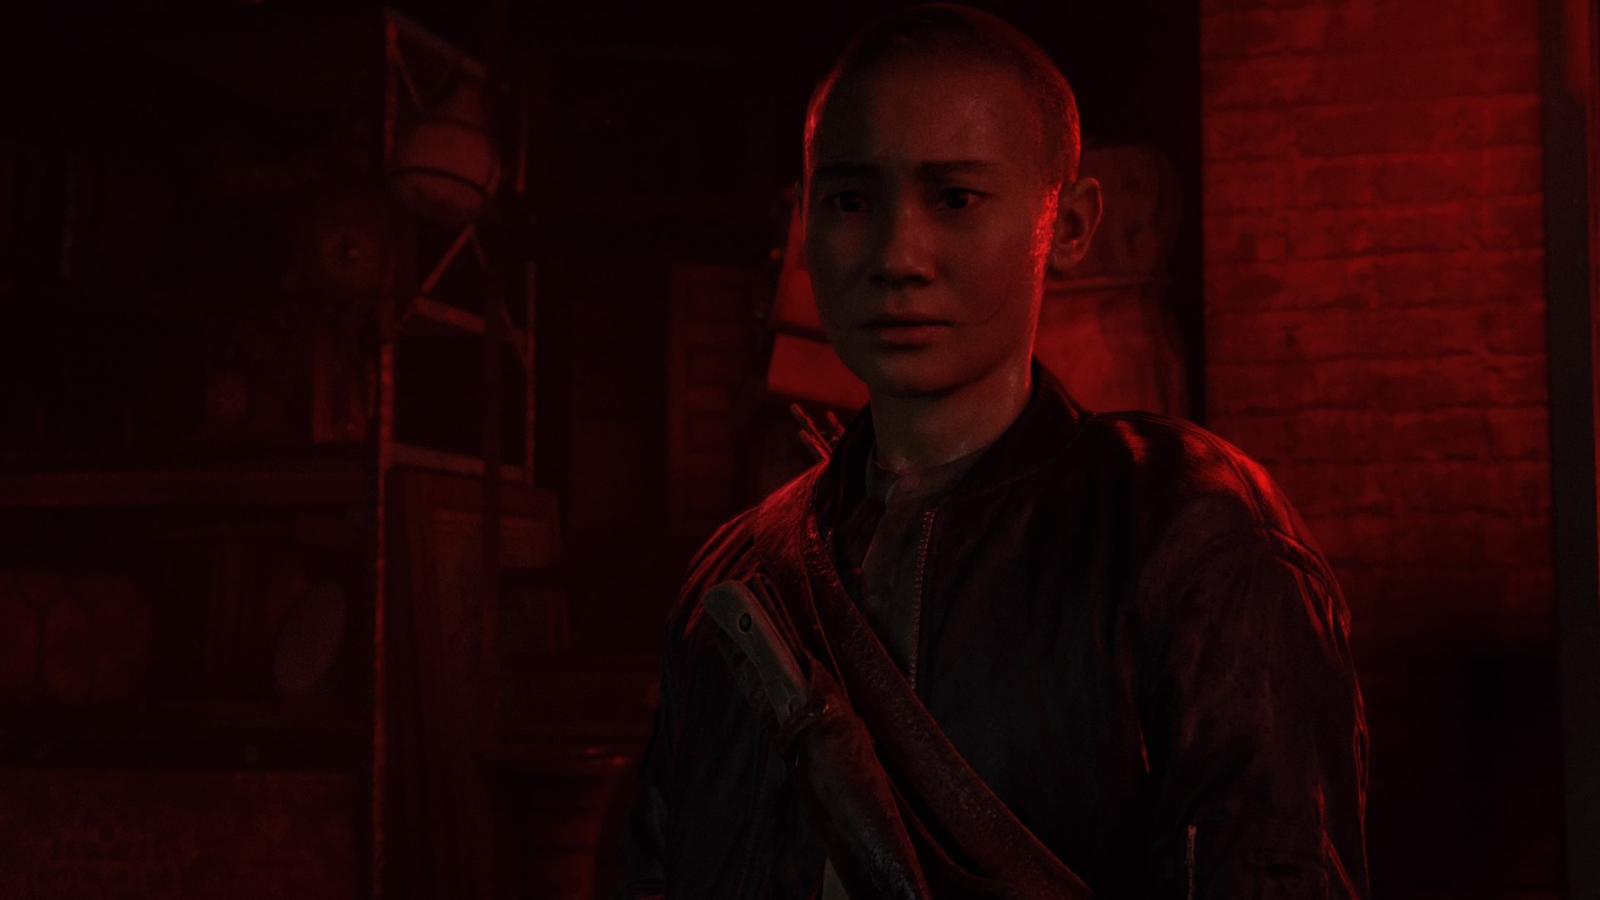 The Last of Us' Trans Character: Who Is Lev in 'The Last of Us Part 2'?  Explained